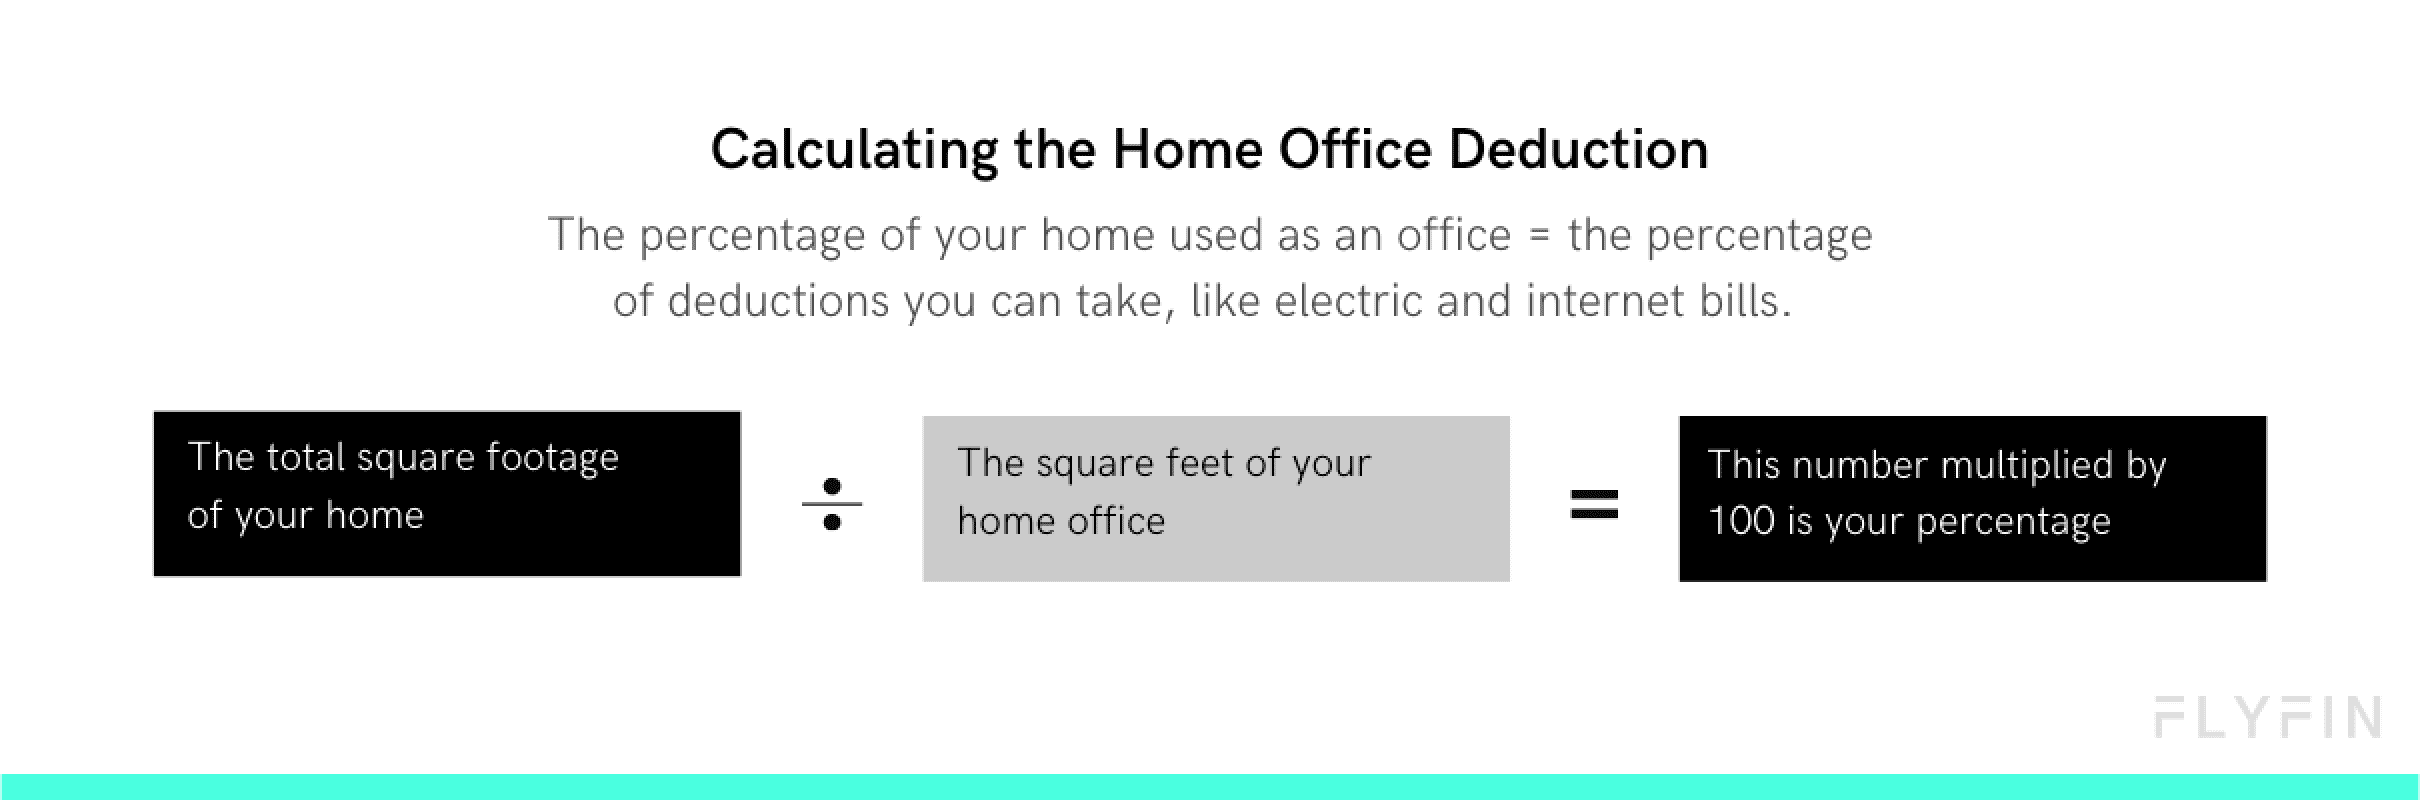 Image showing how to calculate home office deduction for taxes. Percentage of home used as office = percentage of deductions. Includes electric and internet bills.